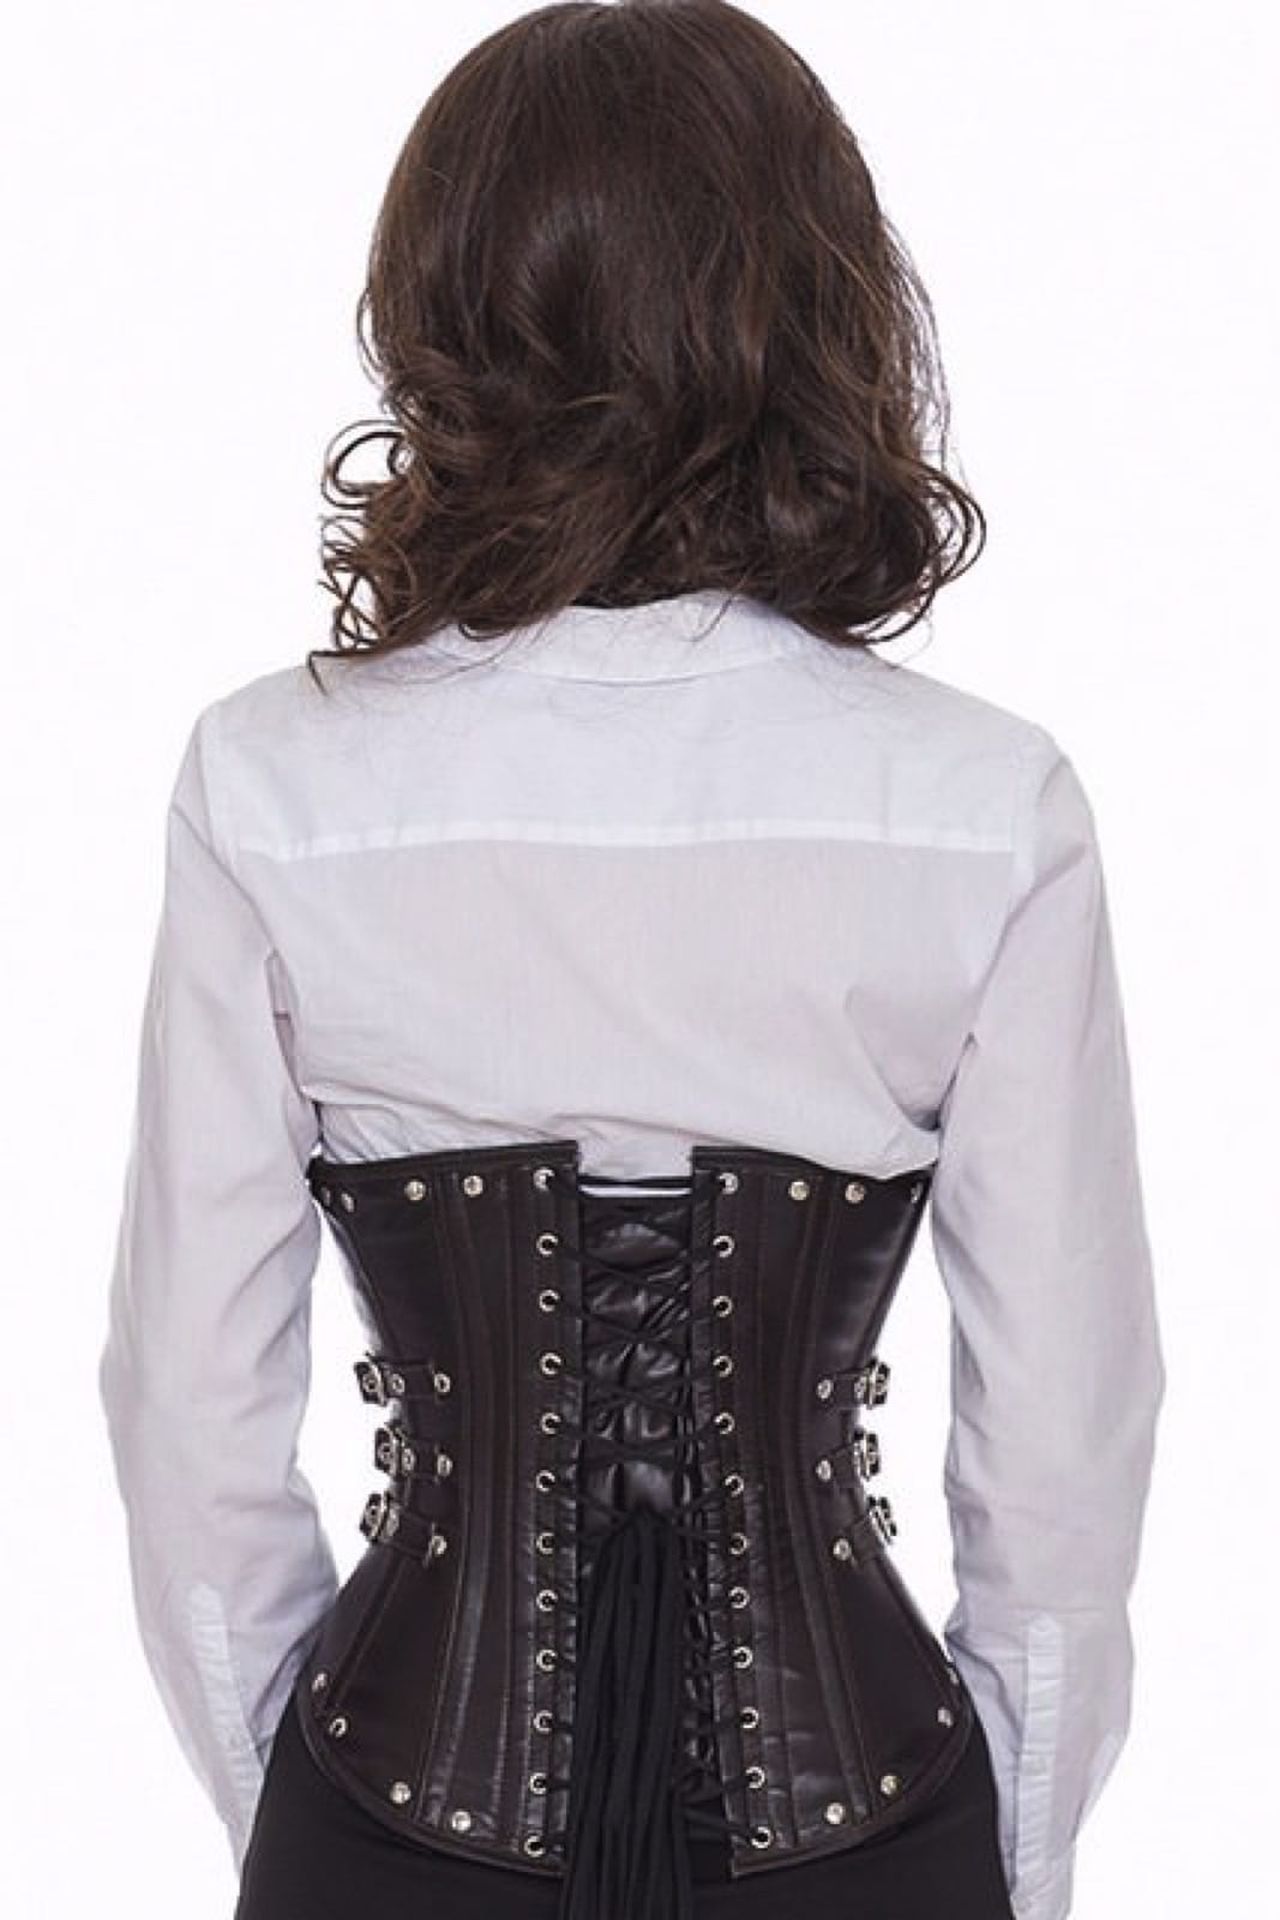 Corset brown leather underbust with rivets and side buckles lg26